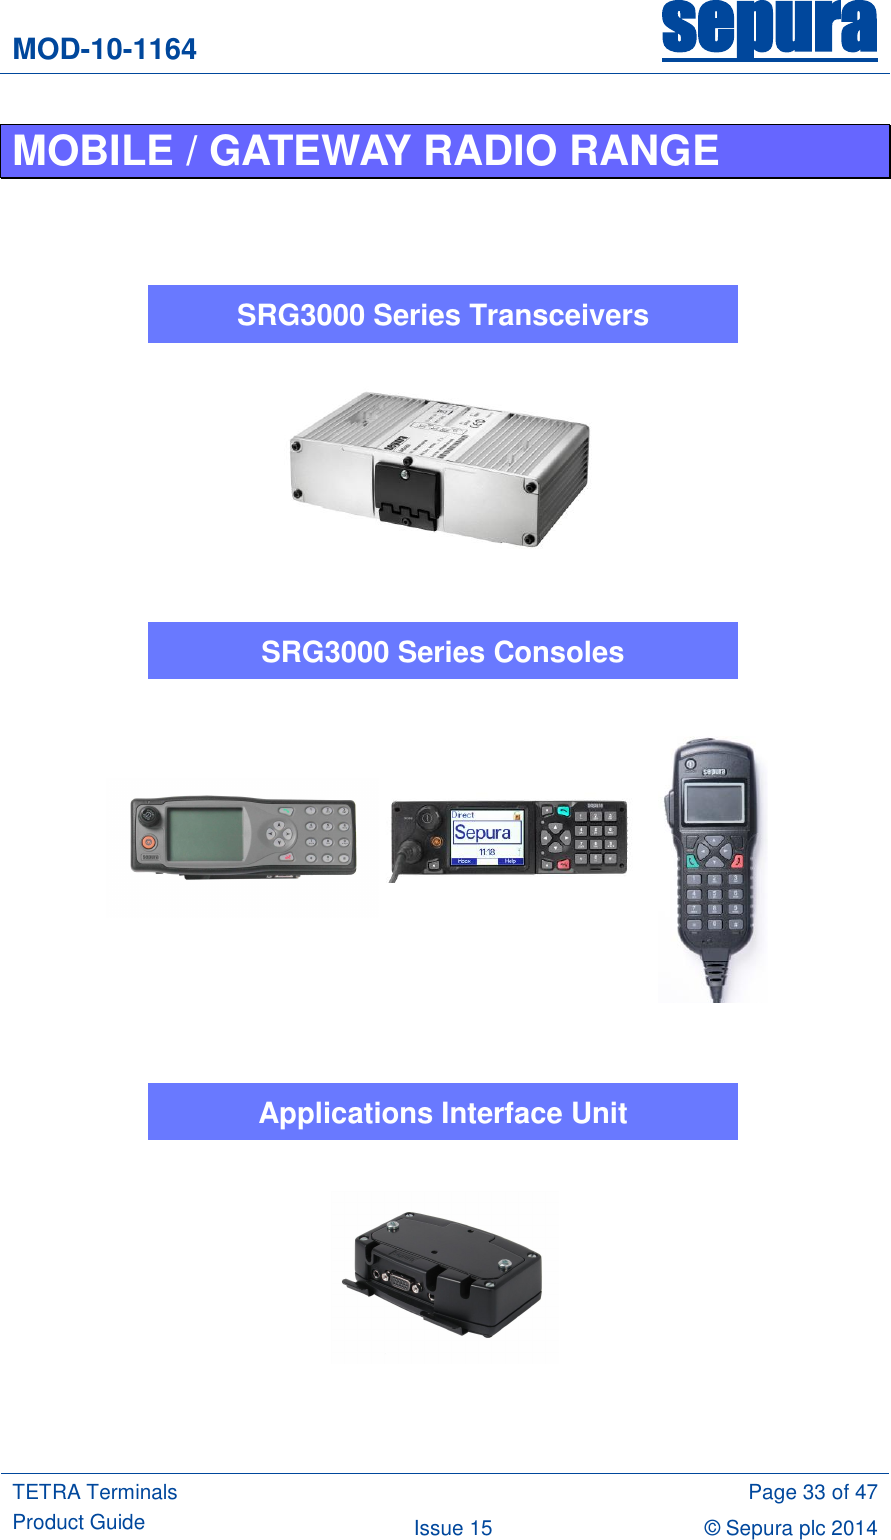 MOD-10-1164 sepura  TETRA Terminals Product Guide  Page 33 of 47 Issue 15 © Sepura plc 2014   MOBILE / GATEWAY RADIO RANGE                                 SRG3000 Series Transceivers Applications Interface Unit SRG3000 Series Consoles 